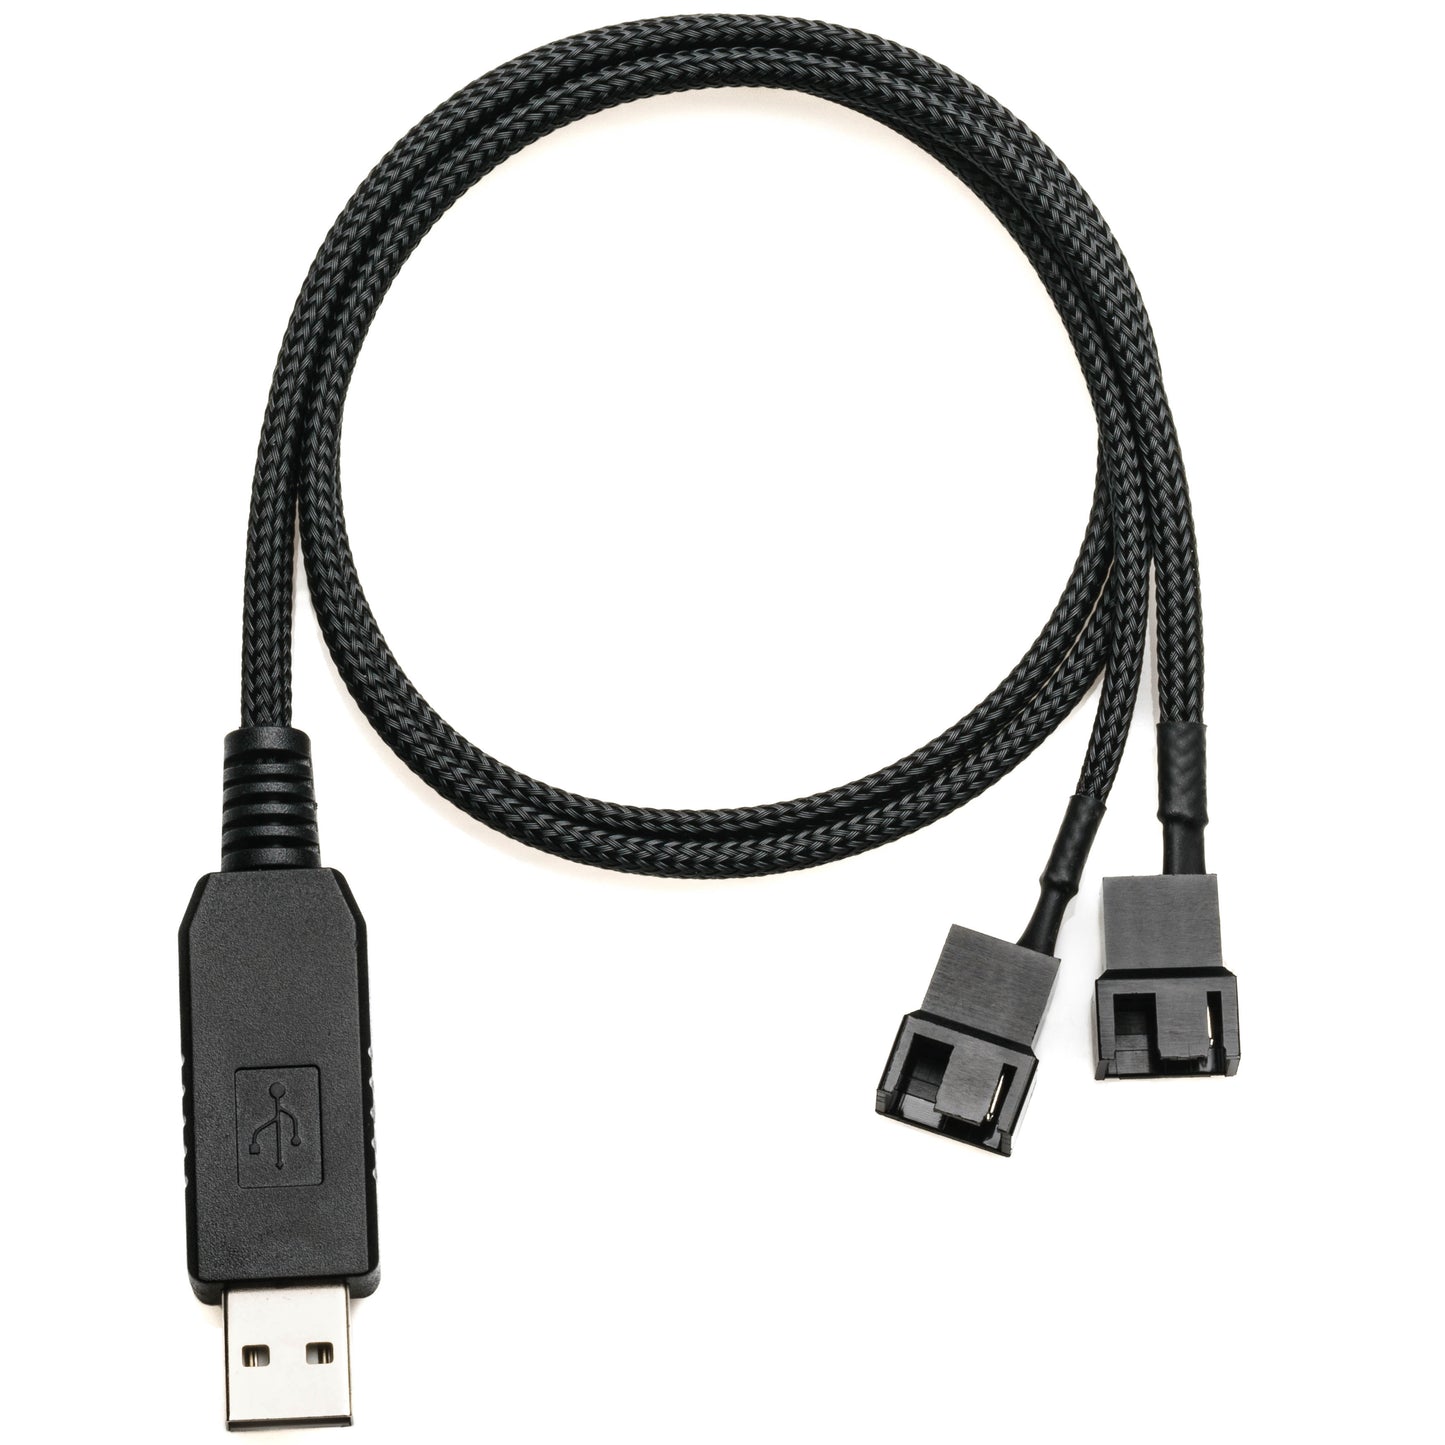 USB 12V to Dual 4-Pin Fan Power Adapter Cable